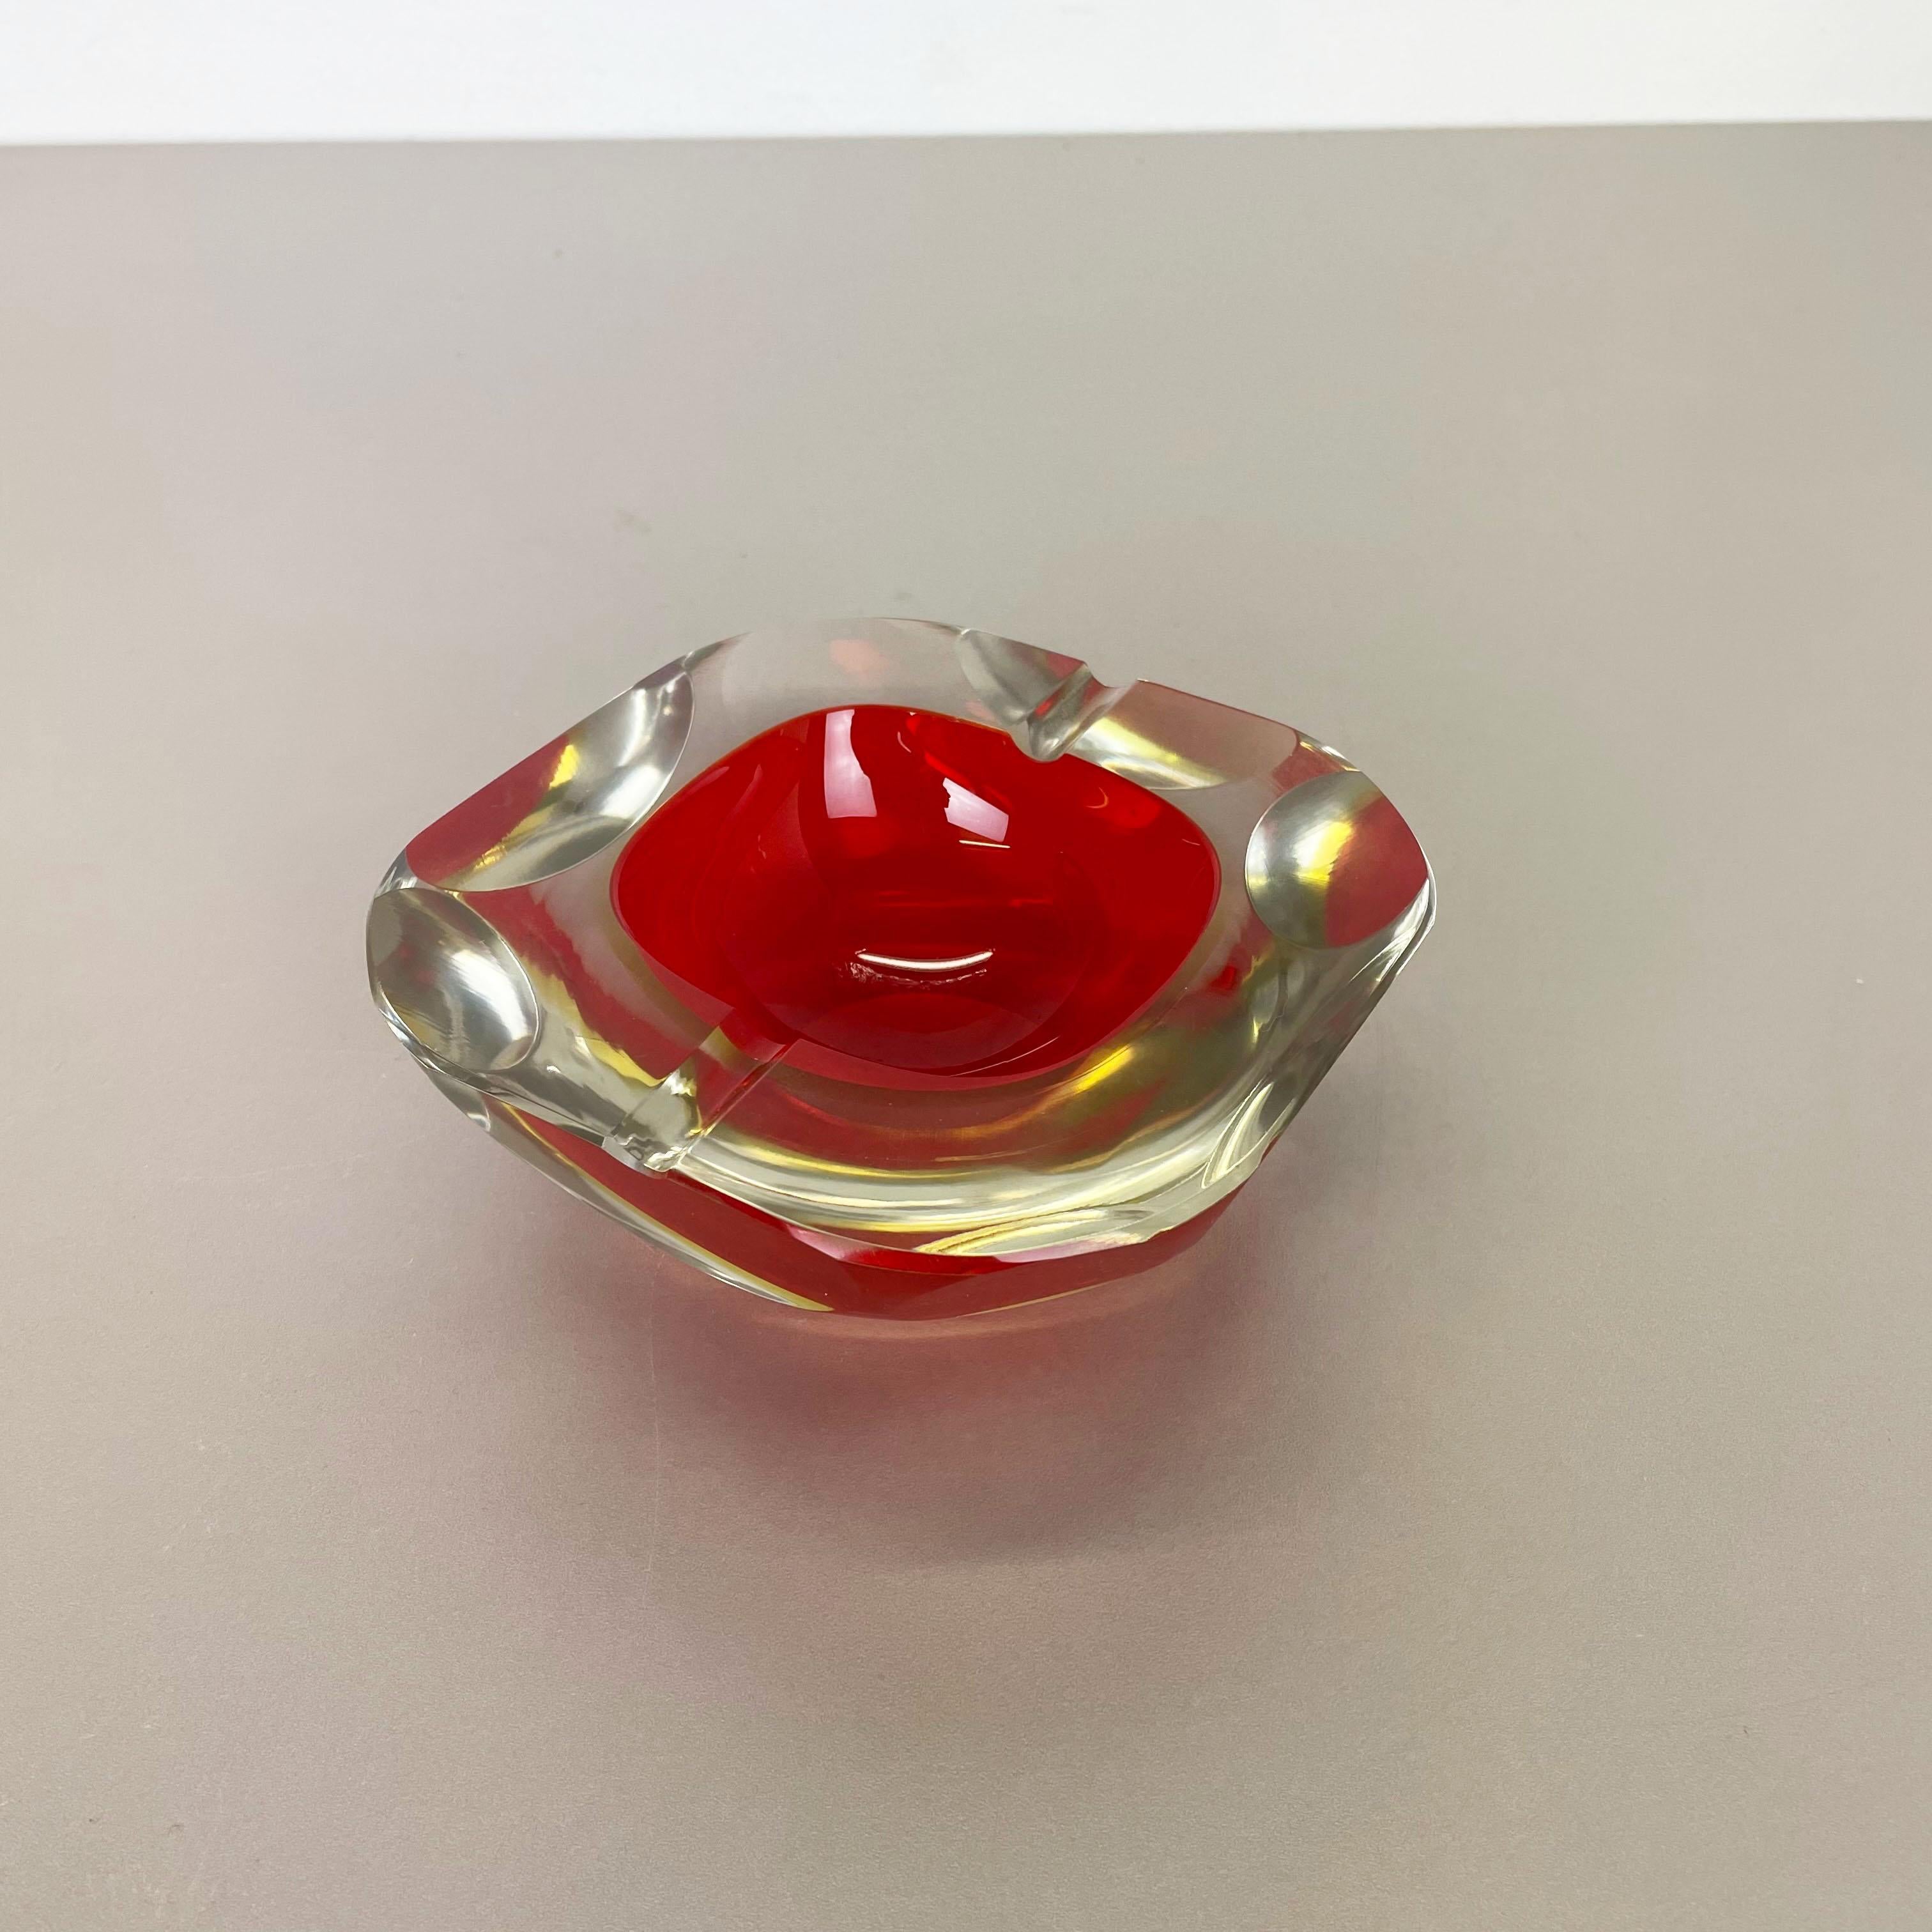 Italian 1, 6 kg Murano Glass Faceted Sommerso Bowl Element Ashtray, Murano, Italy, 1970s For Sale